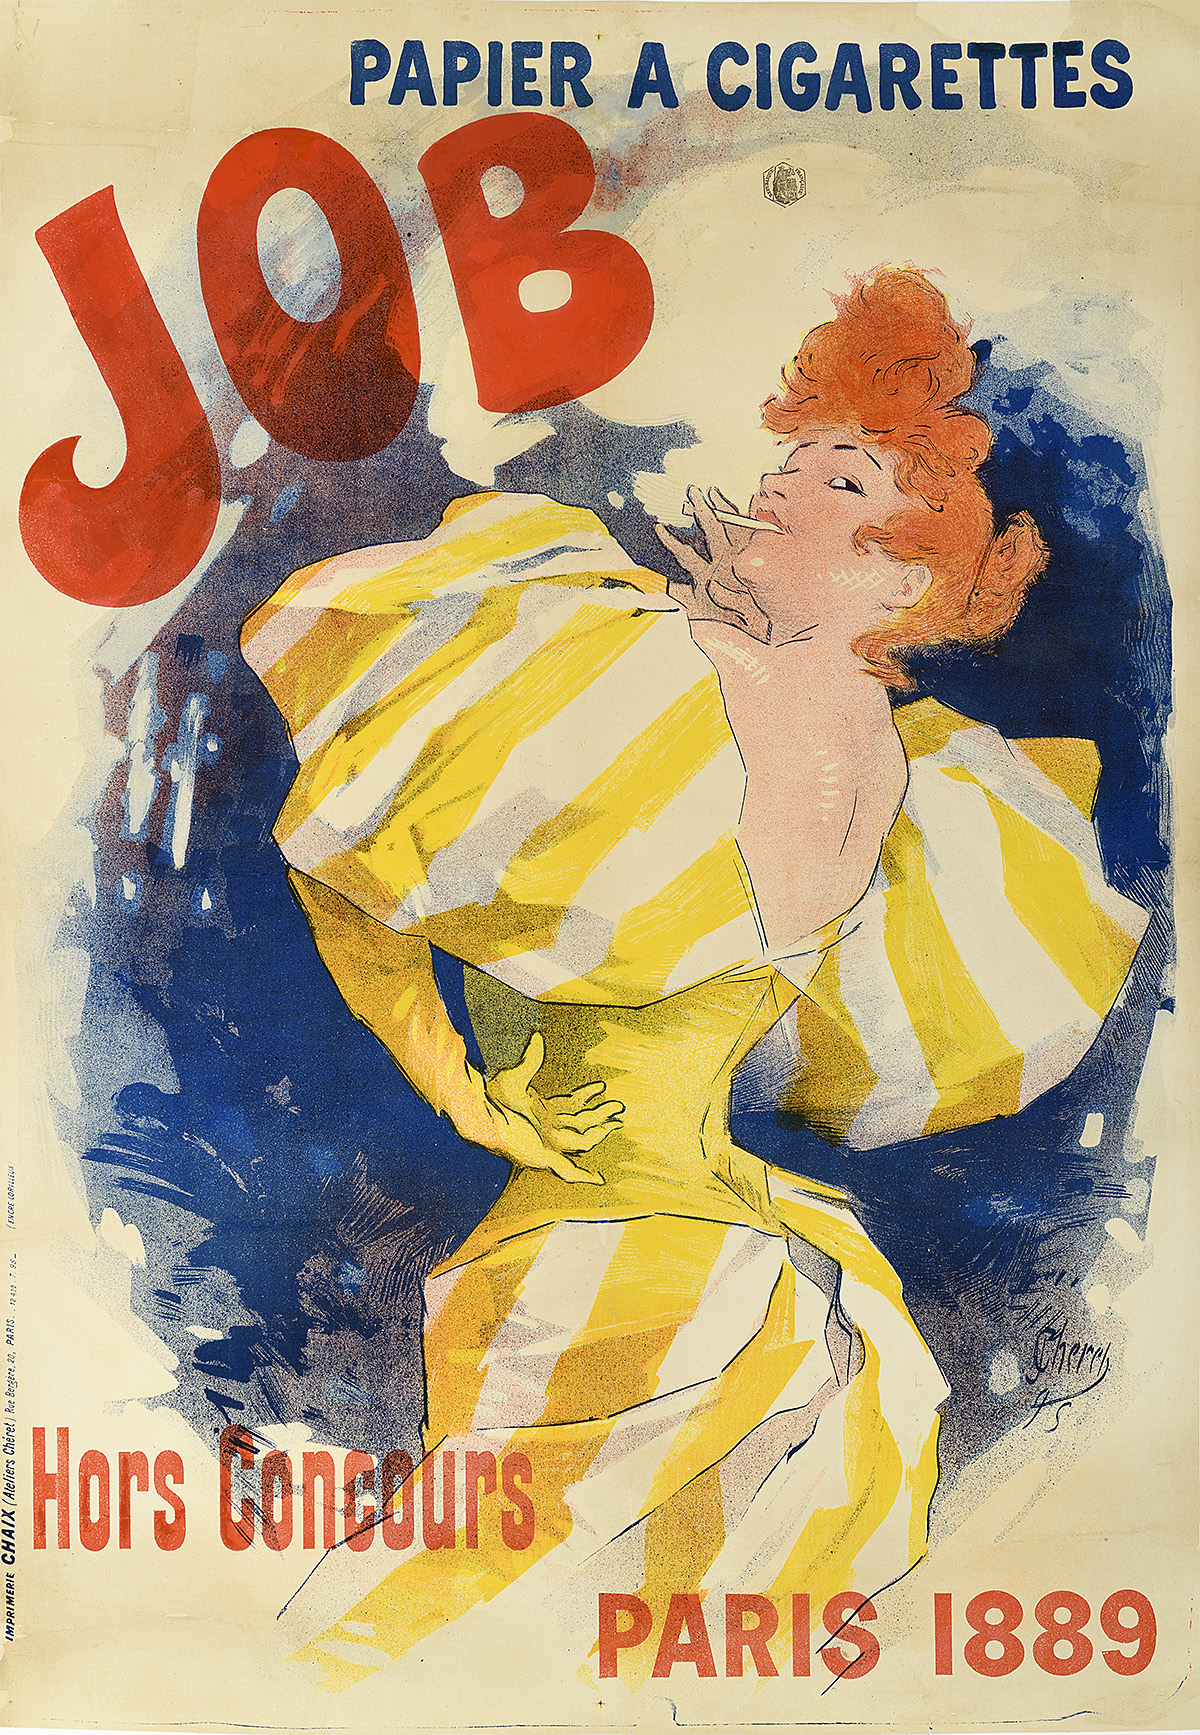 illustrational poster of a woman with red hair in a yellow dress looking over her shoulder as she smokes a cigarette